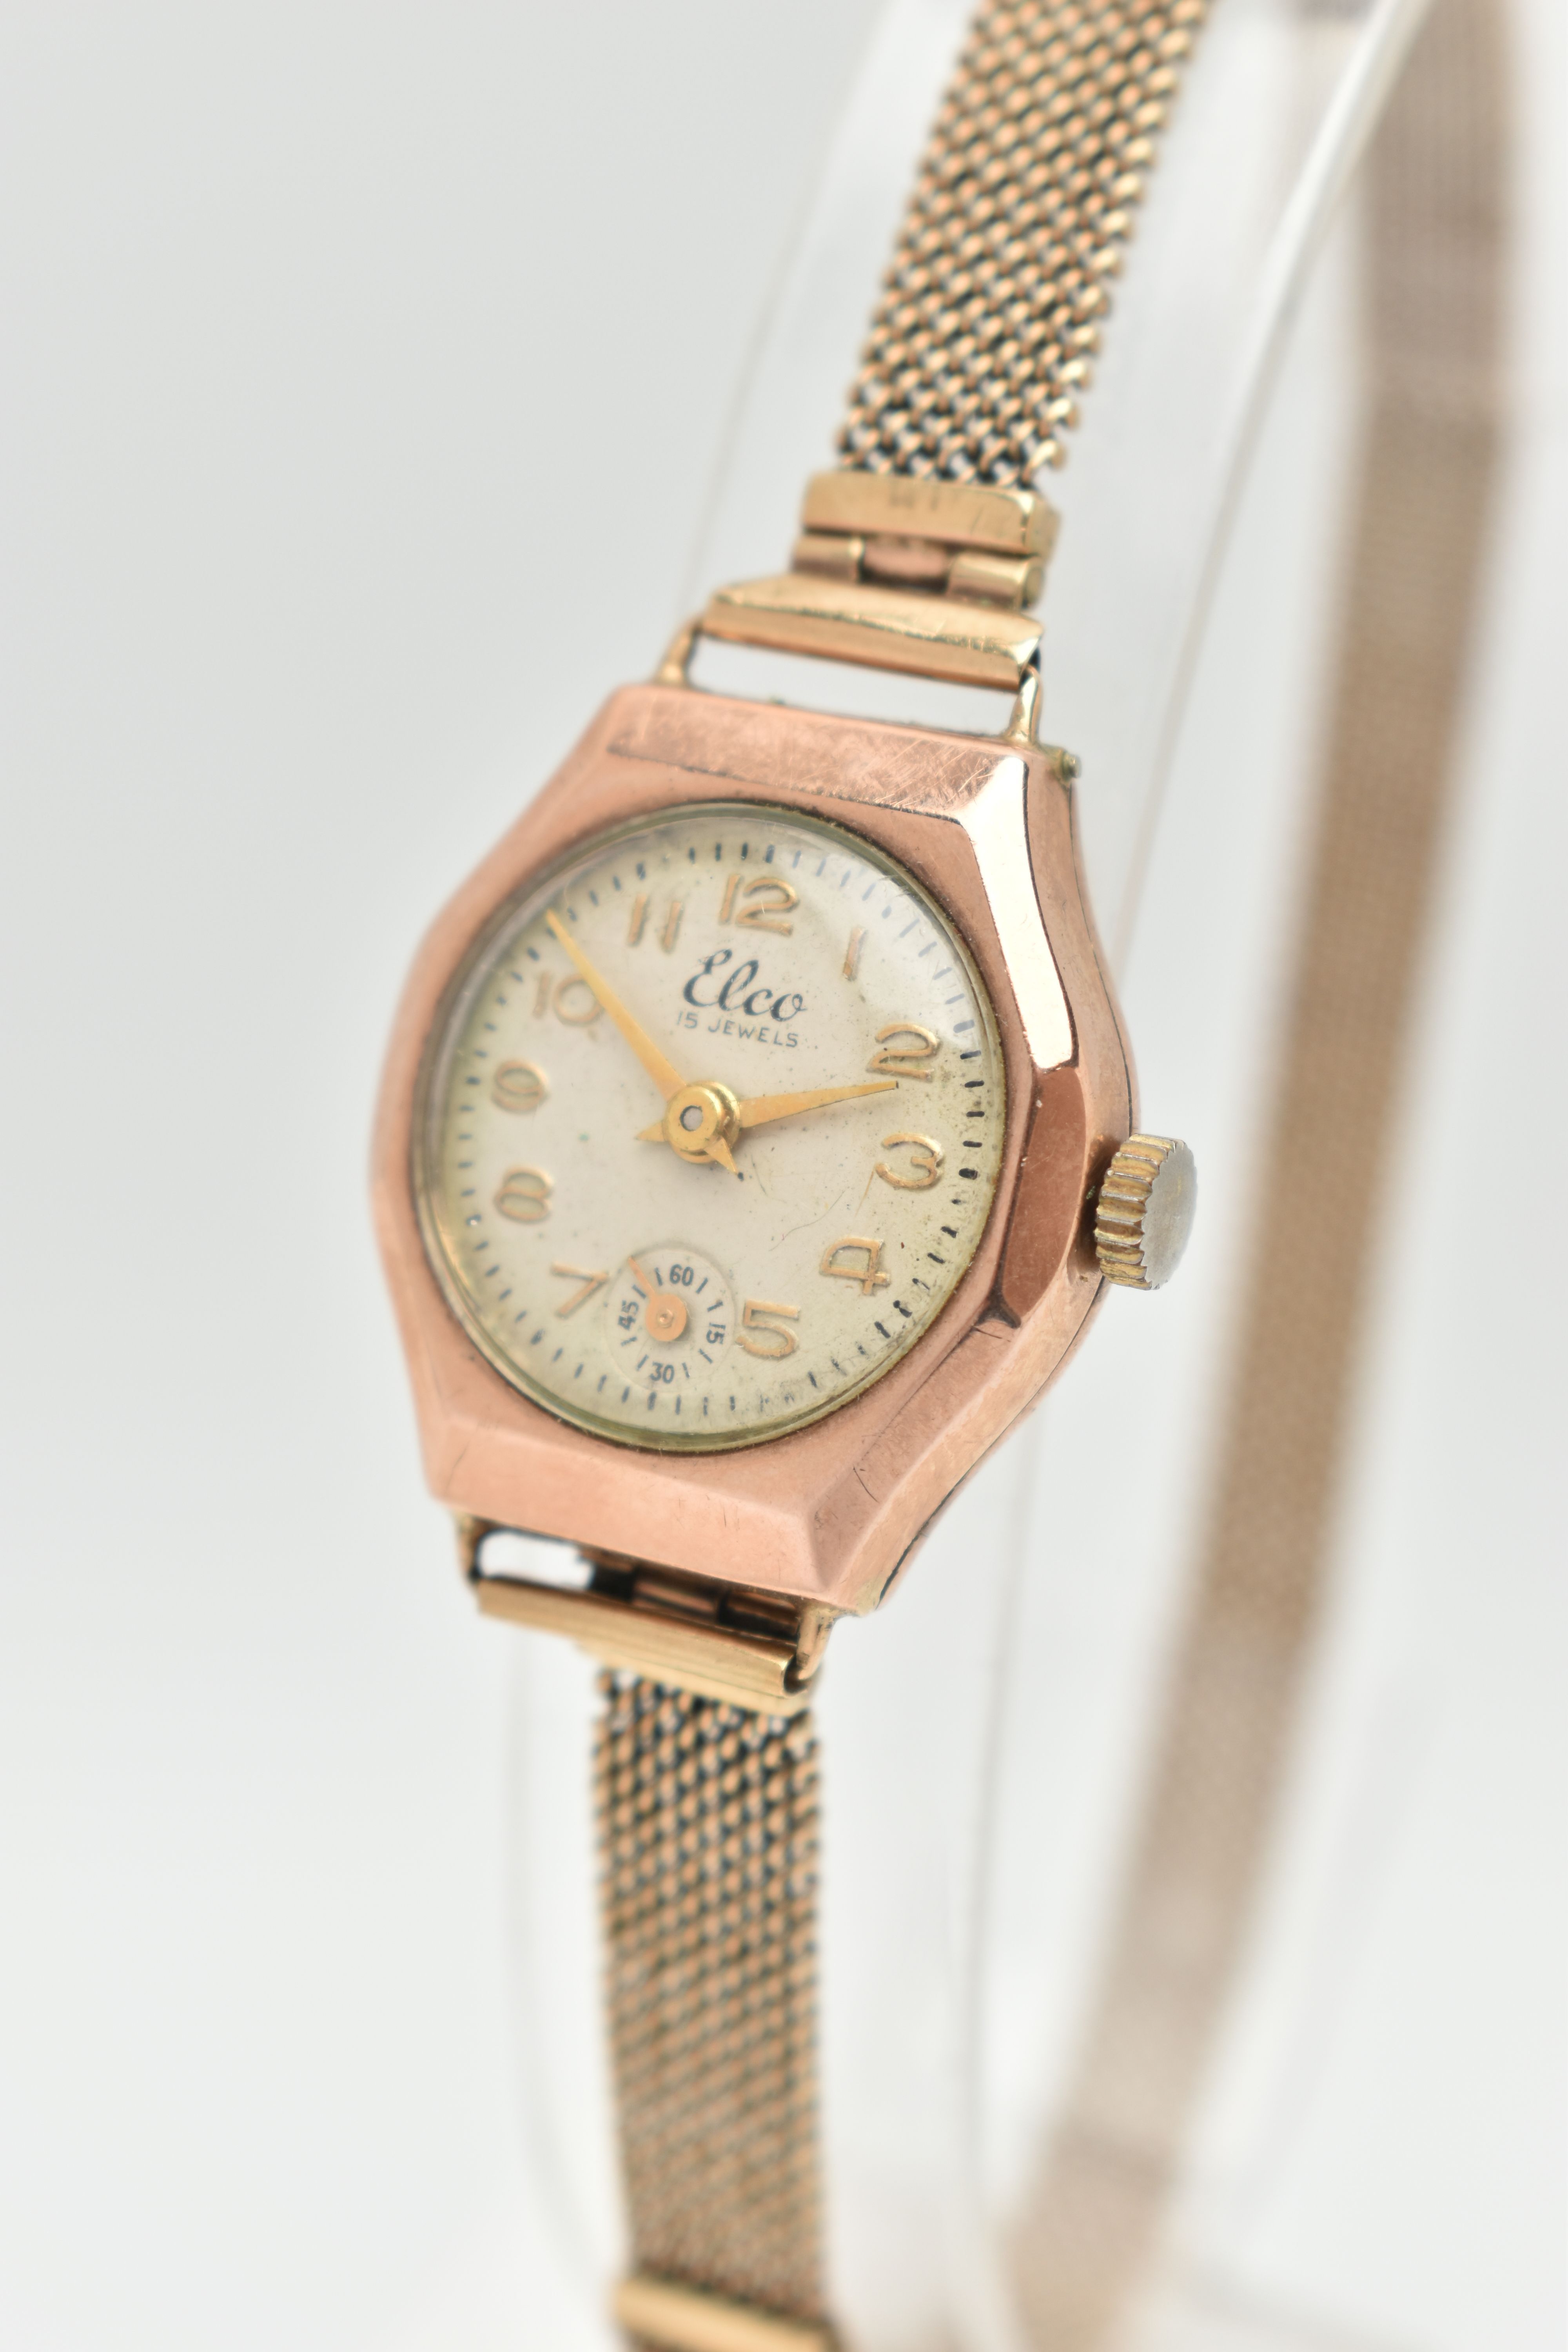 A 9CT GOLD WRISTWATCH, hand wound movement, round dial signed 'Elco' 15 jewels, Arabic numerals, - Image 3 of 6